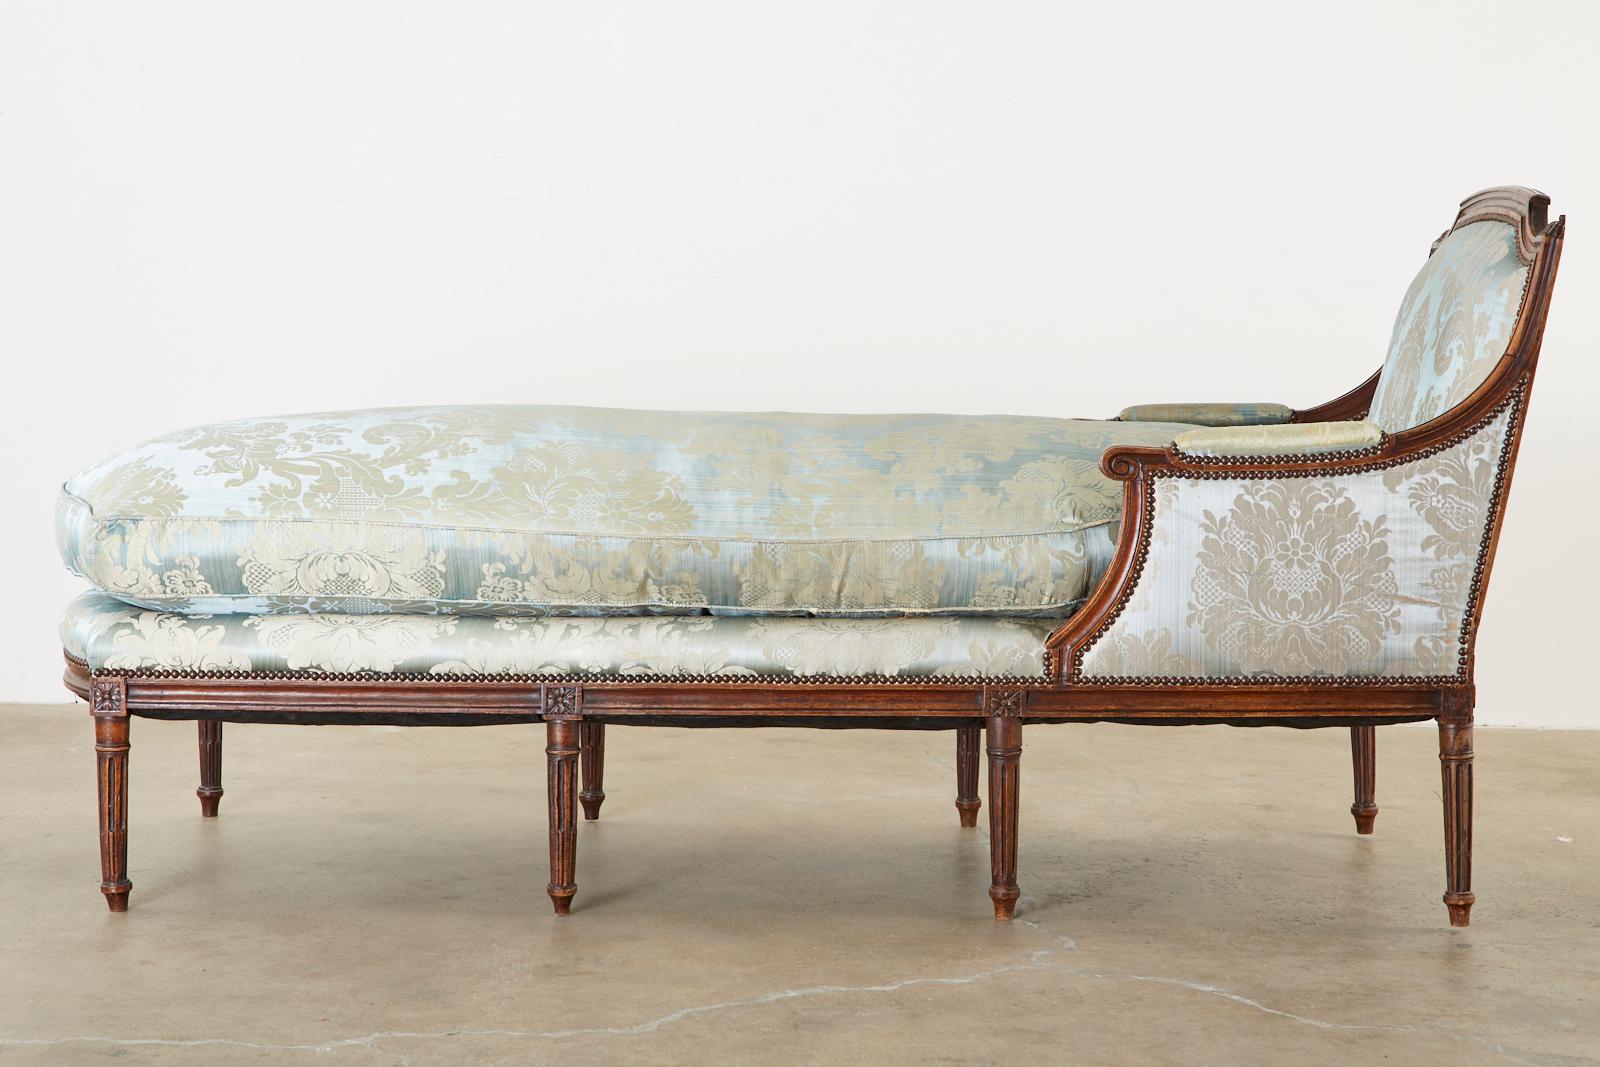 19th Century French Louis XVI Style Chaise Lounge Daybed For Sale at 1stDibs